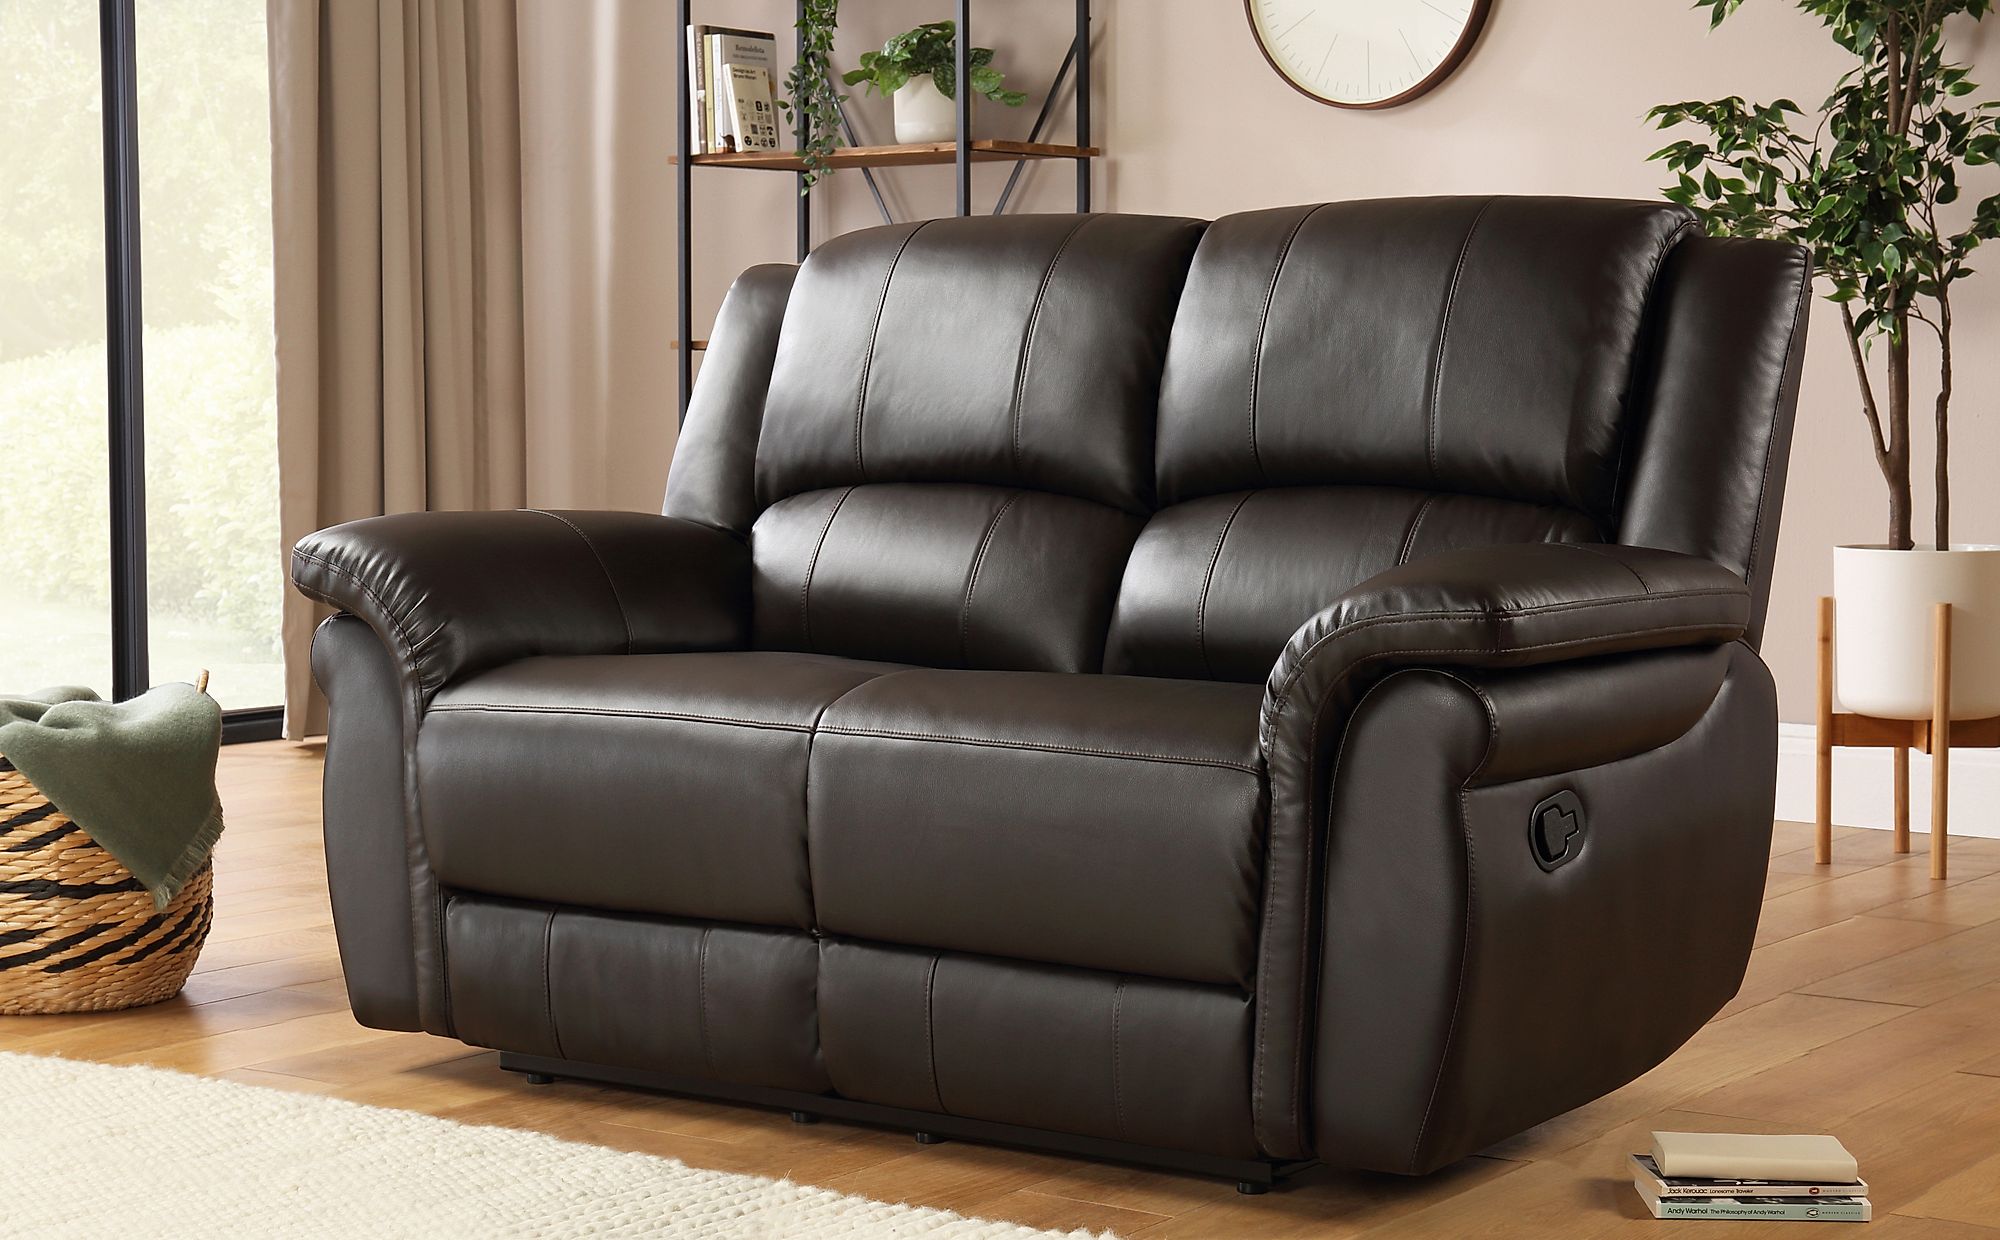 2 seater brown leather recliner sofa